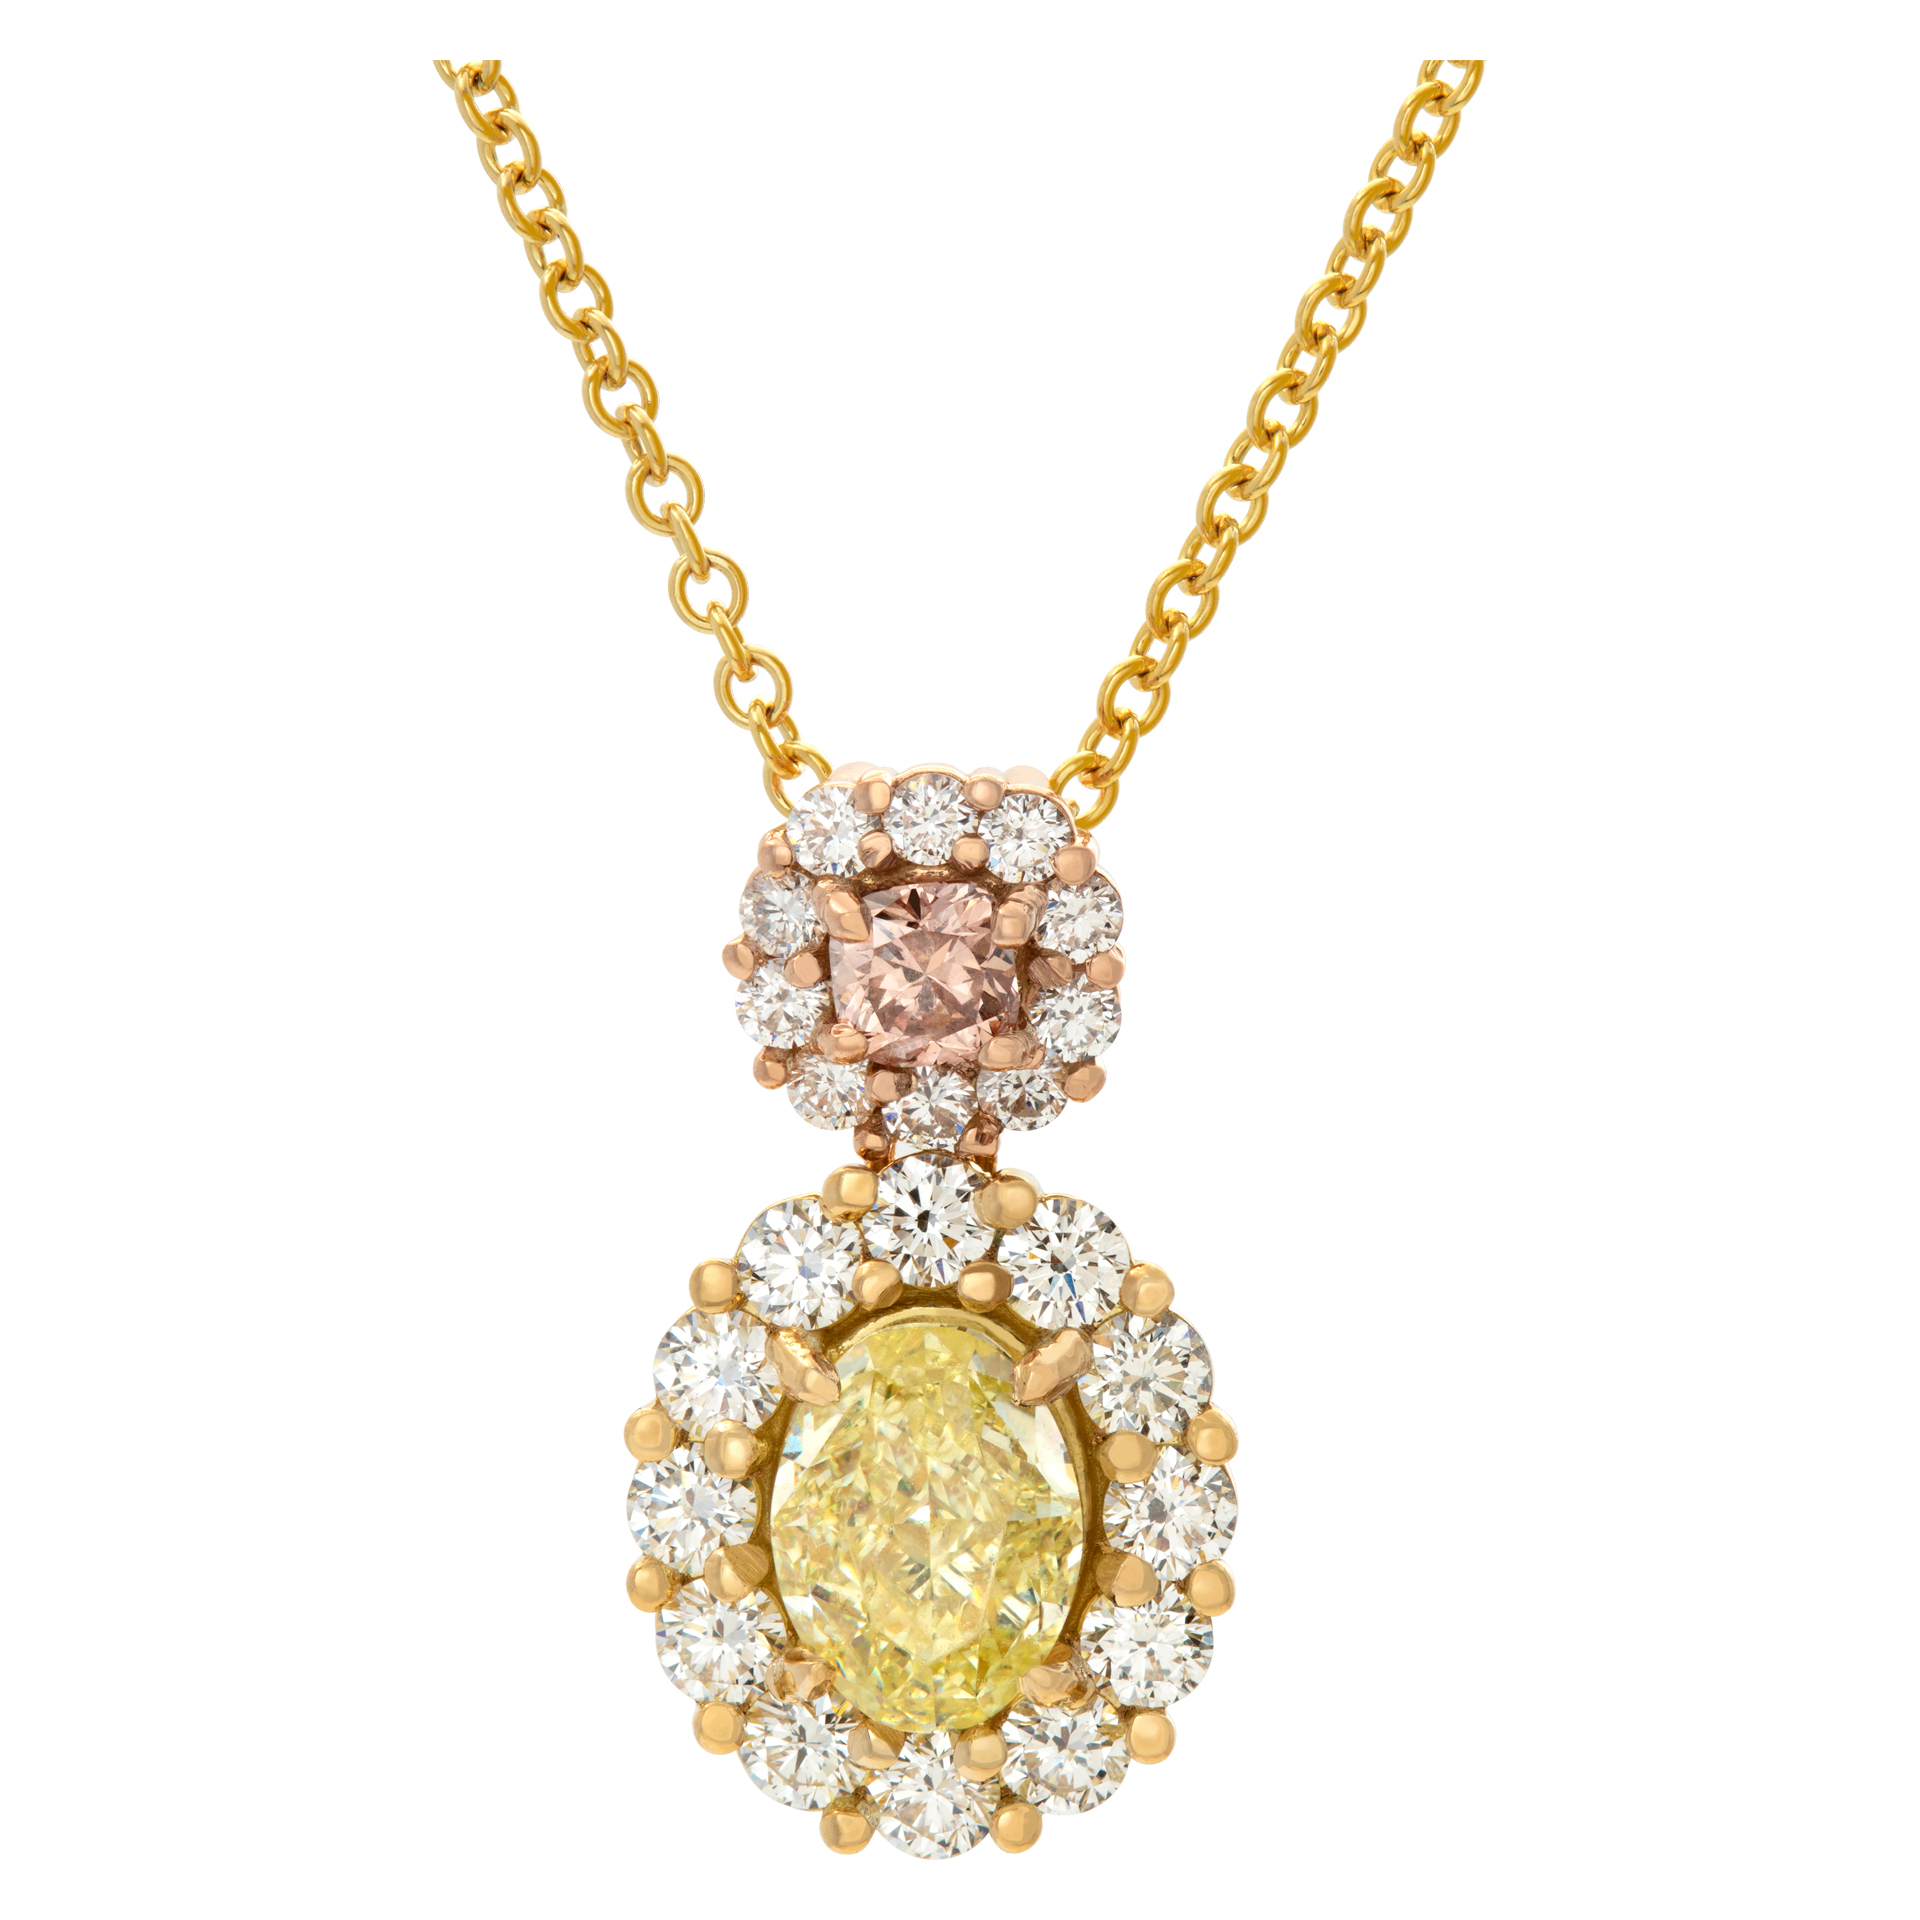 GIA fancy yellow diamond necklace in 18k rose and yellow gold